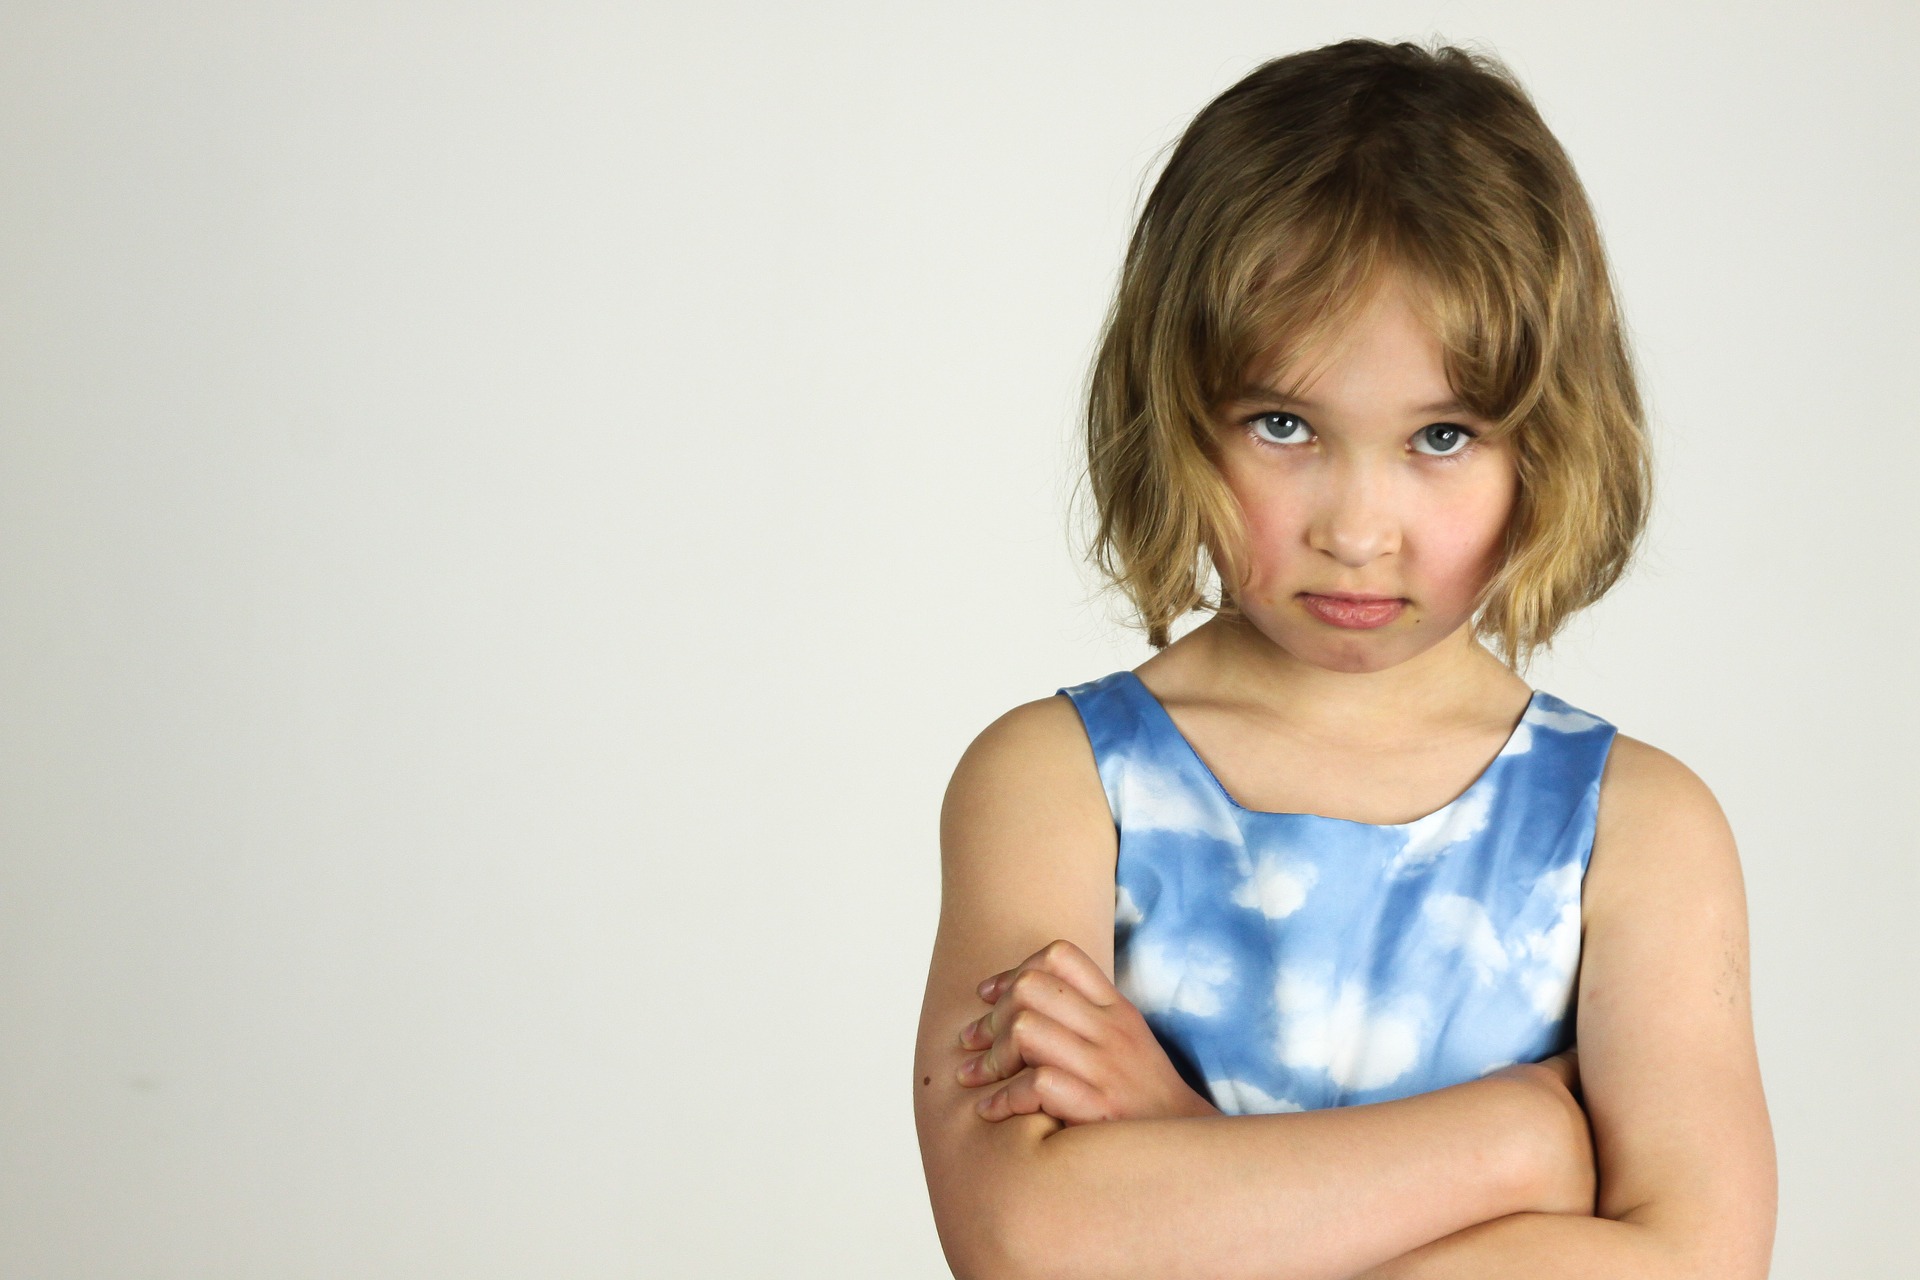 How to Help Kids Get Out of a Bad Mood